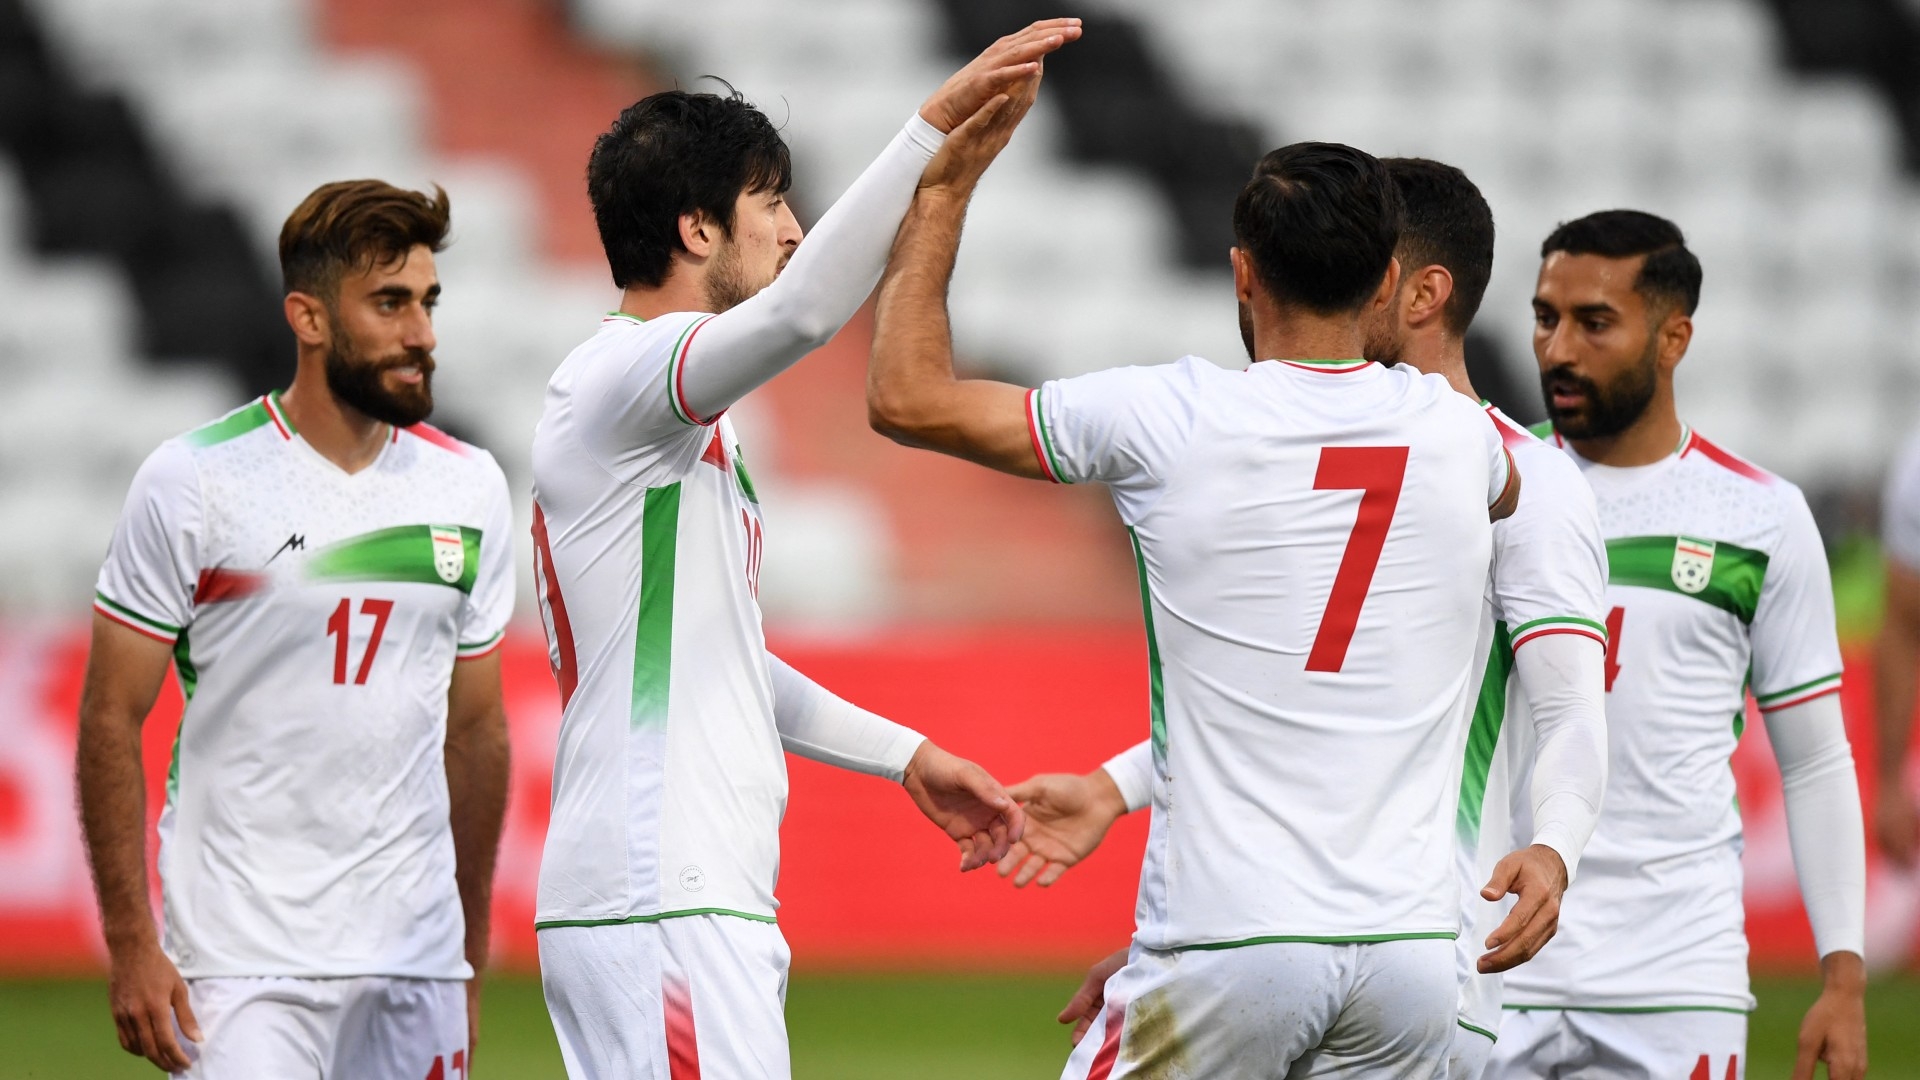 Iran's players celebrate during the friendly football match between Senegal and Iran in Moedling, Austria on 27 September 2022 (AFP)